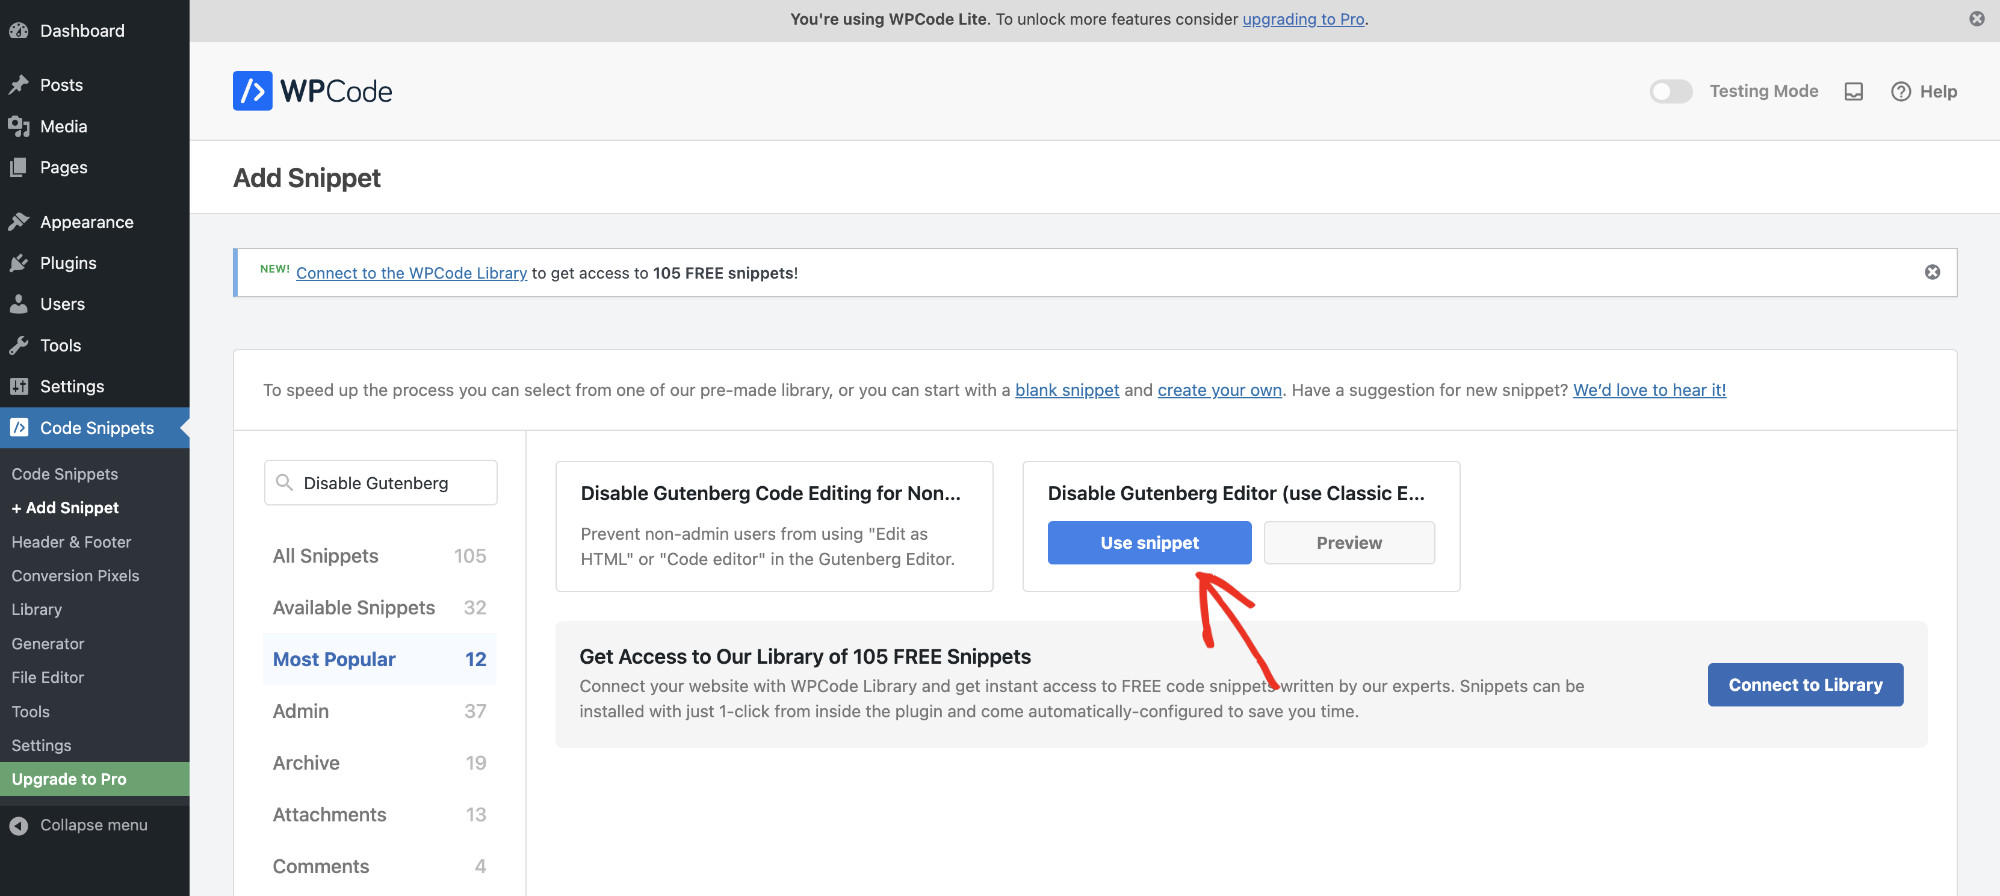 How To Disable Gutenberg Editor Without Plugins For Free: Disable Gutenberg Step 2